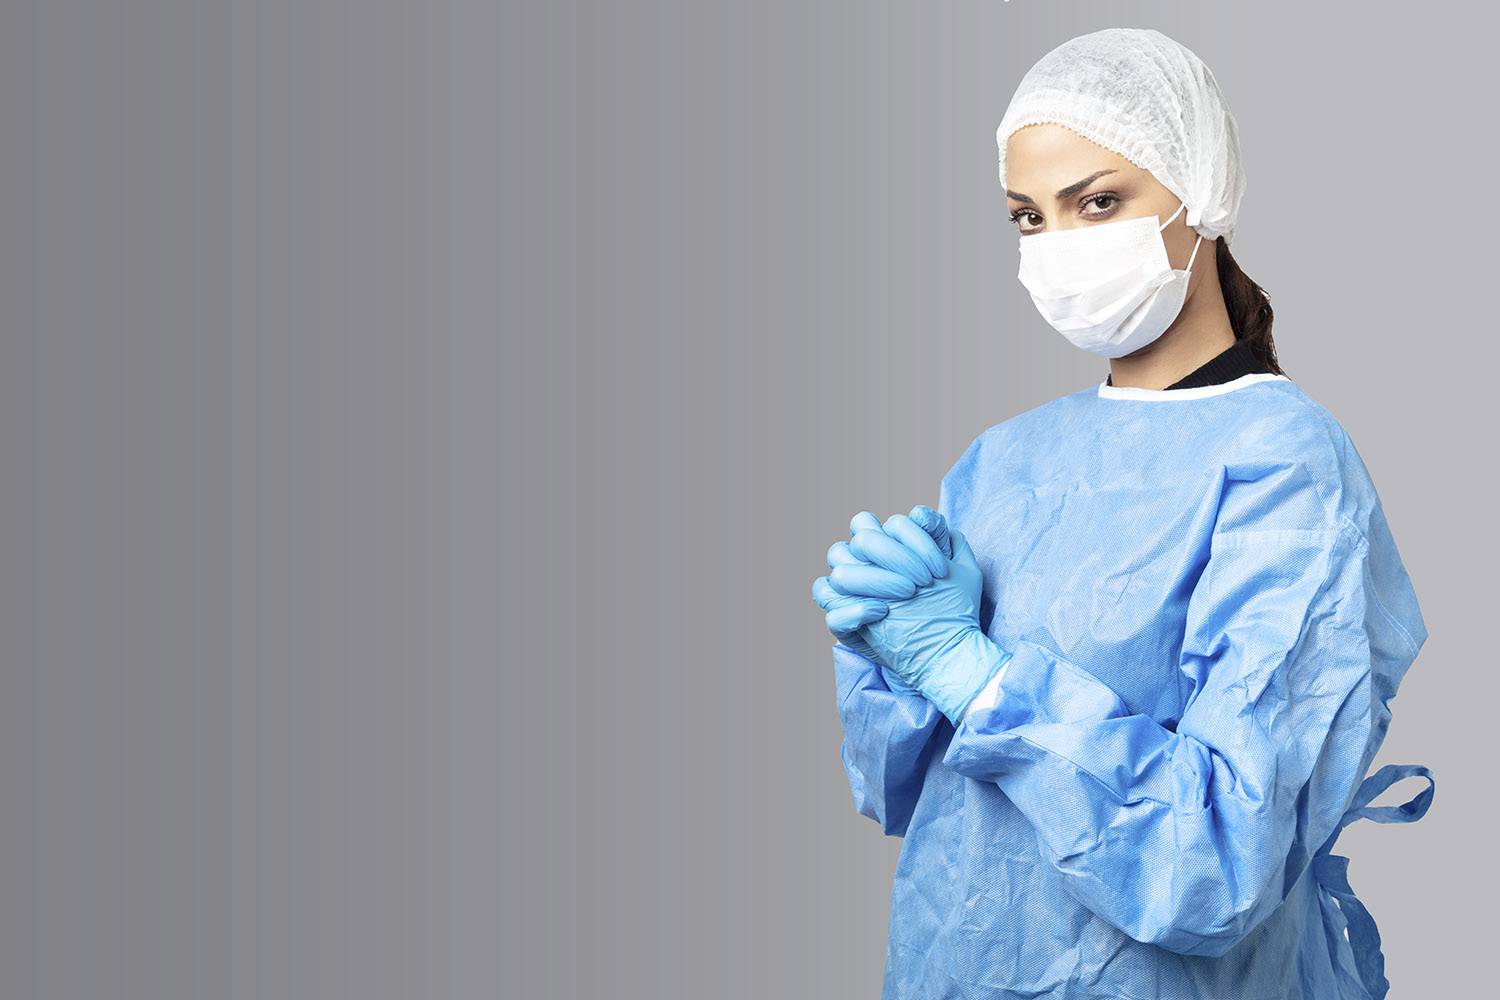 Control infection with high quality medical gowns in multiple styles